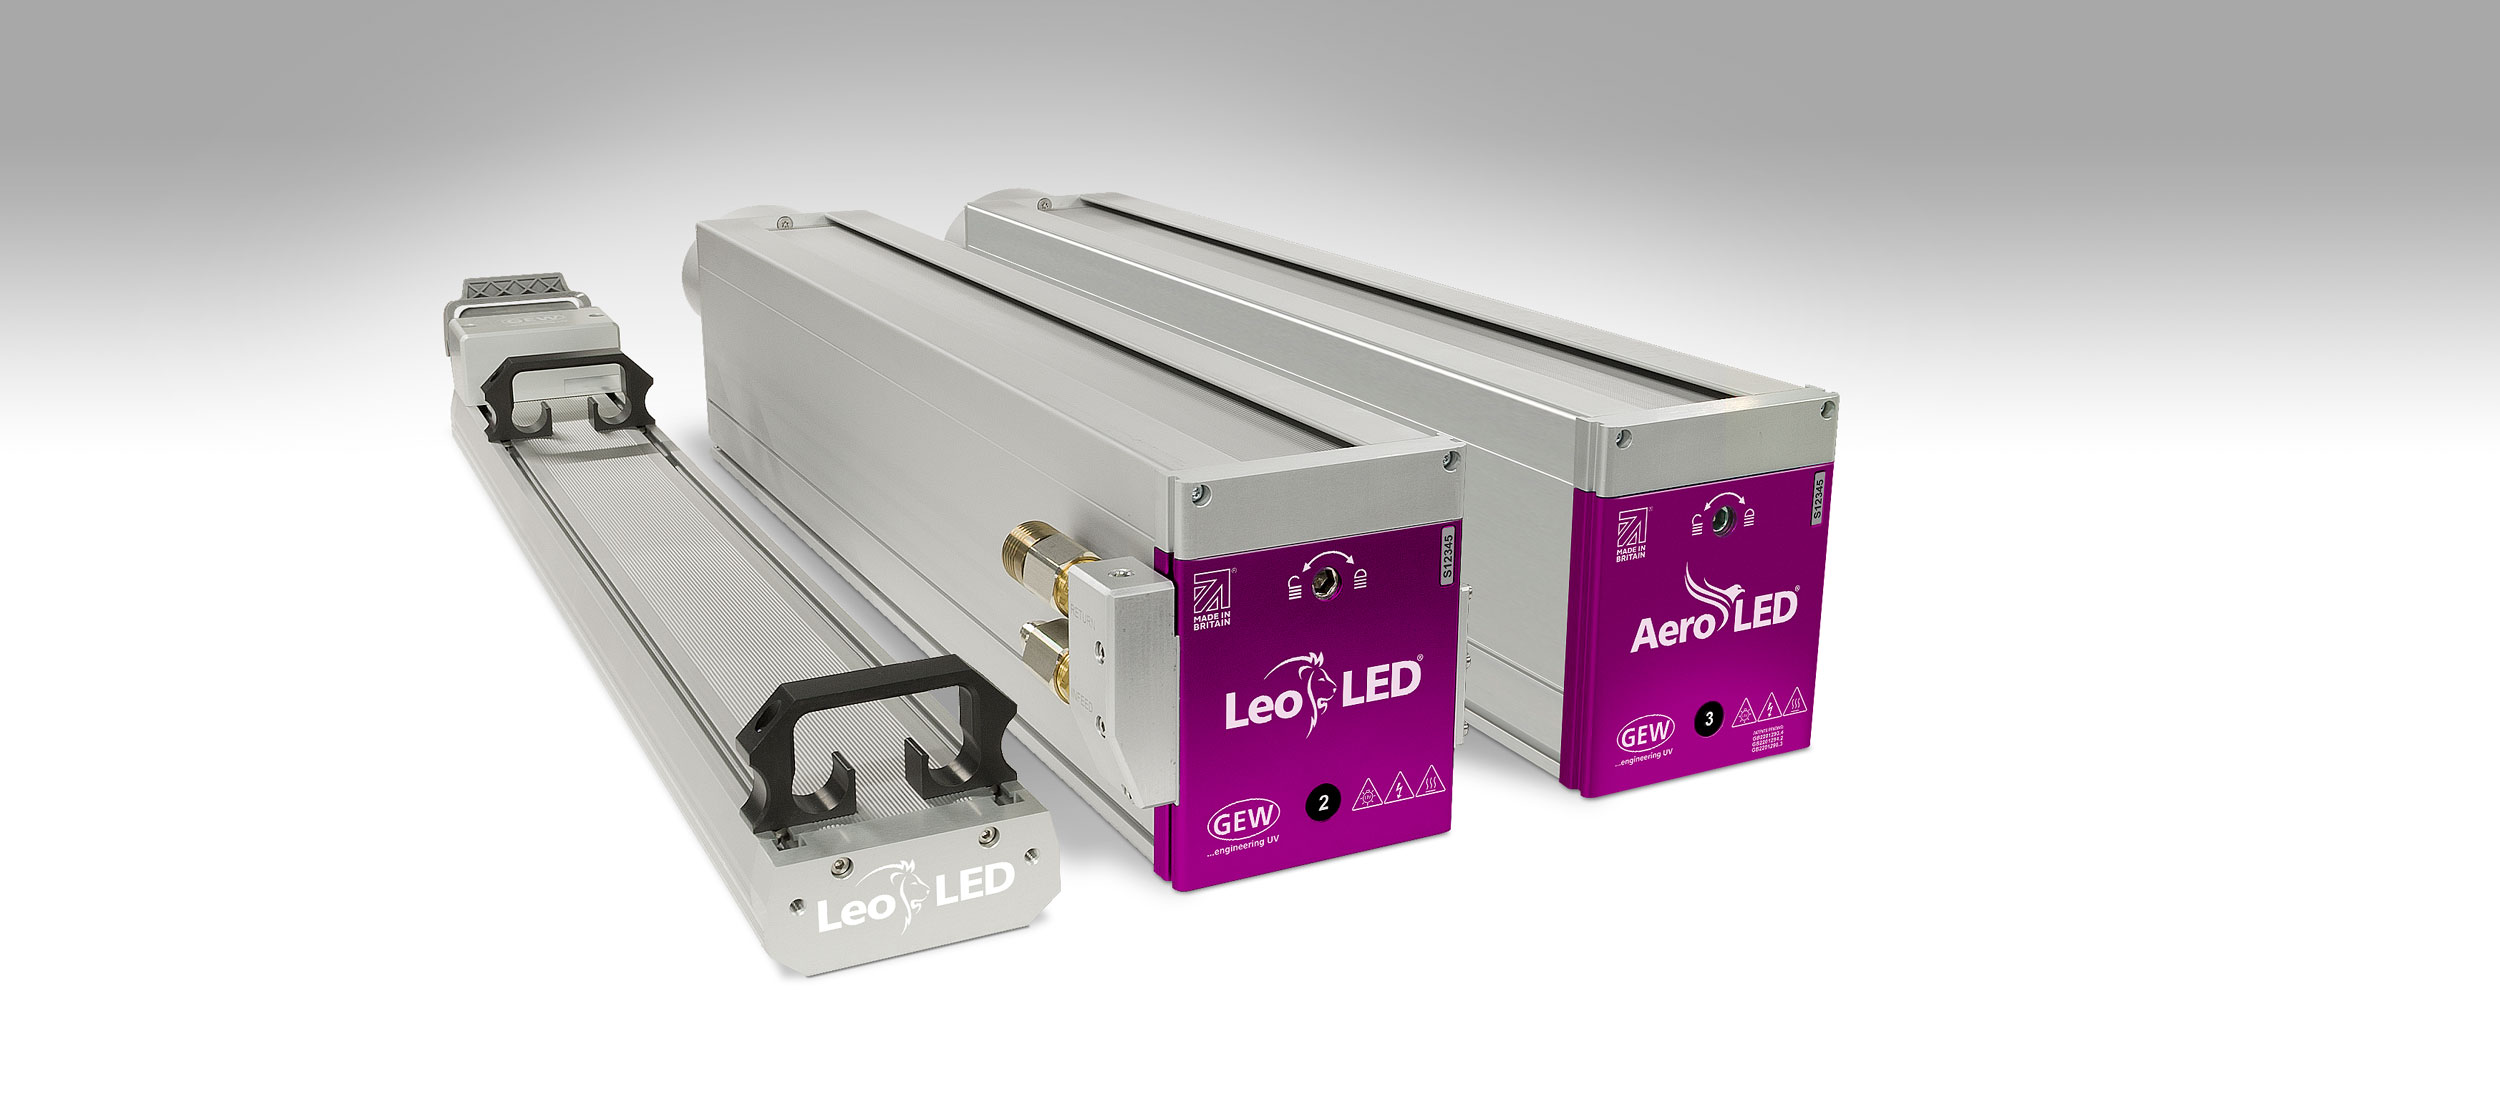 UV Light Suppliers –Specialty Solutions at LightSources